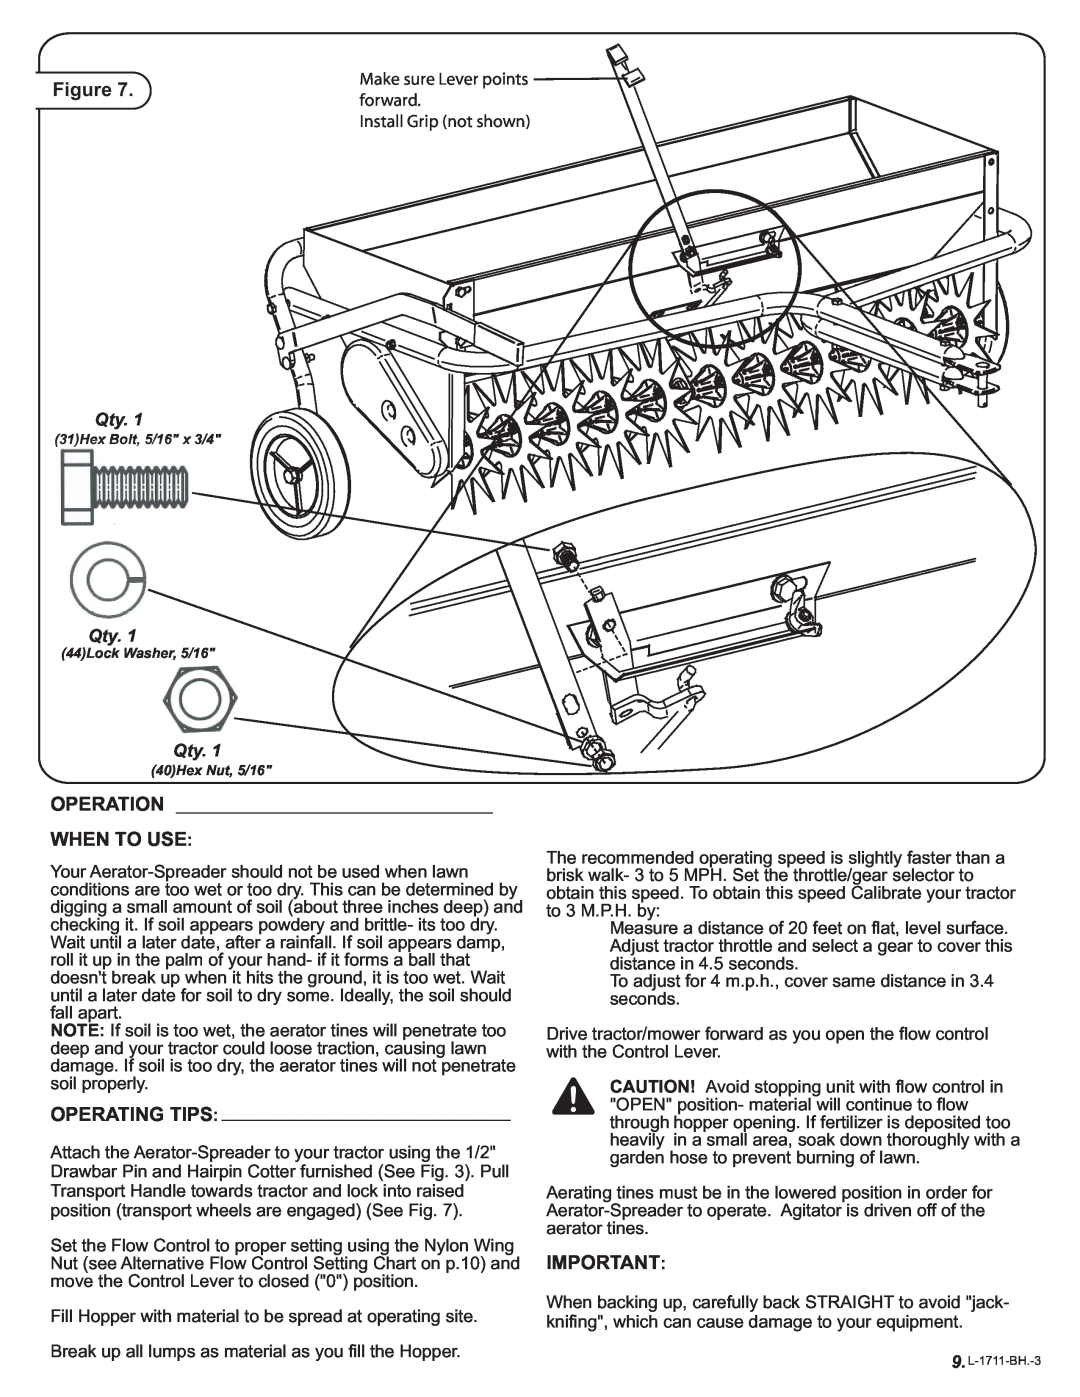 Brinly-Hardy AS-30 BH, AS-40 BH owner manual Operation When To Use, Operating Tips 